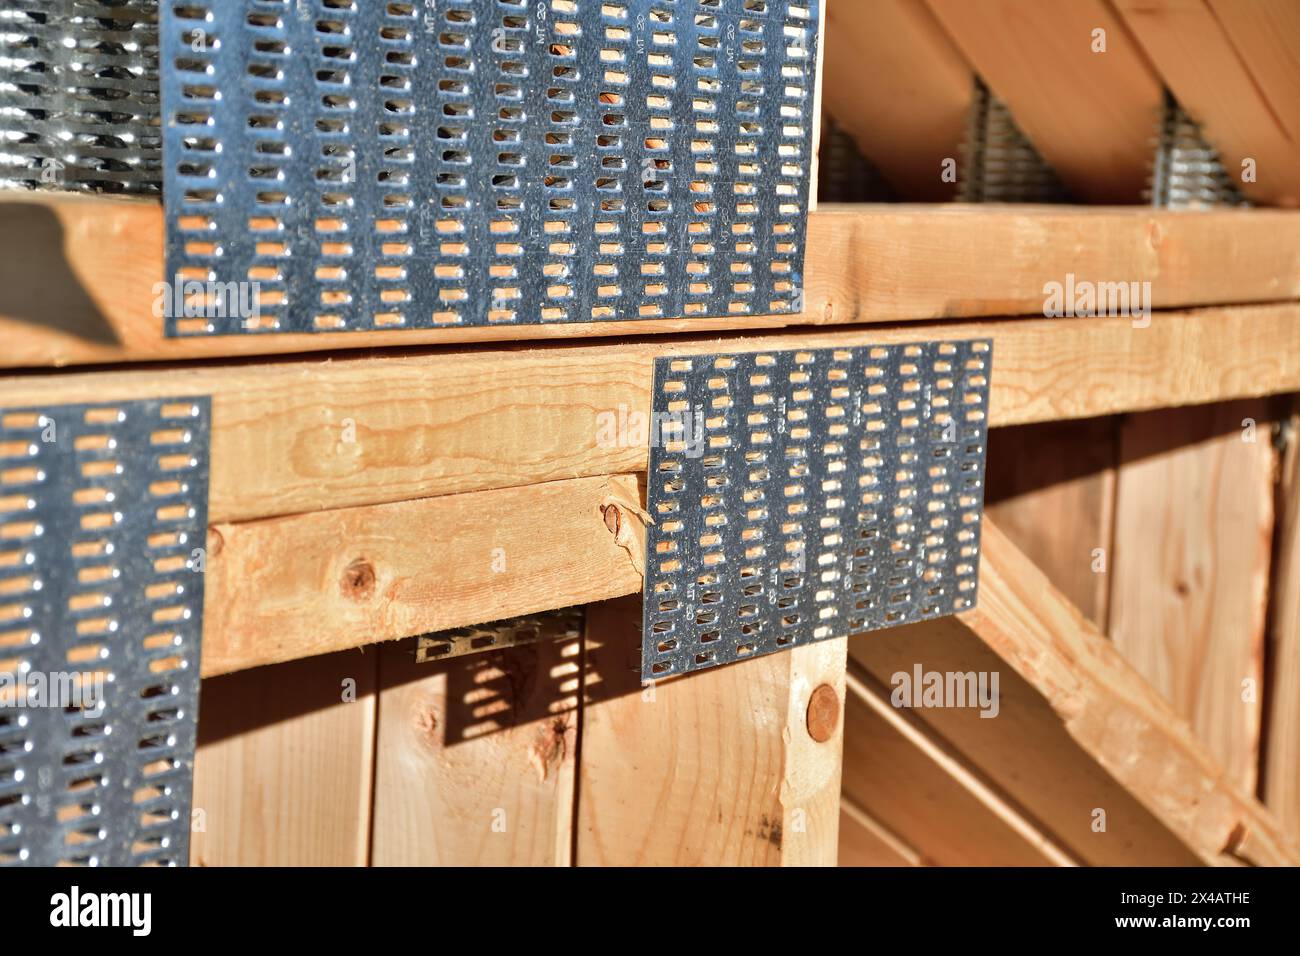 Hot dipped galvanized connector plates for wood structure truss and joist. Stock Photo